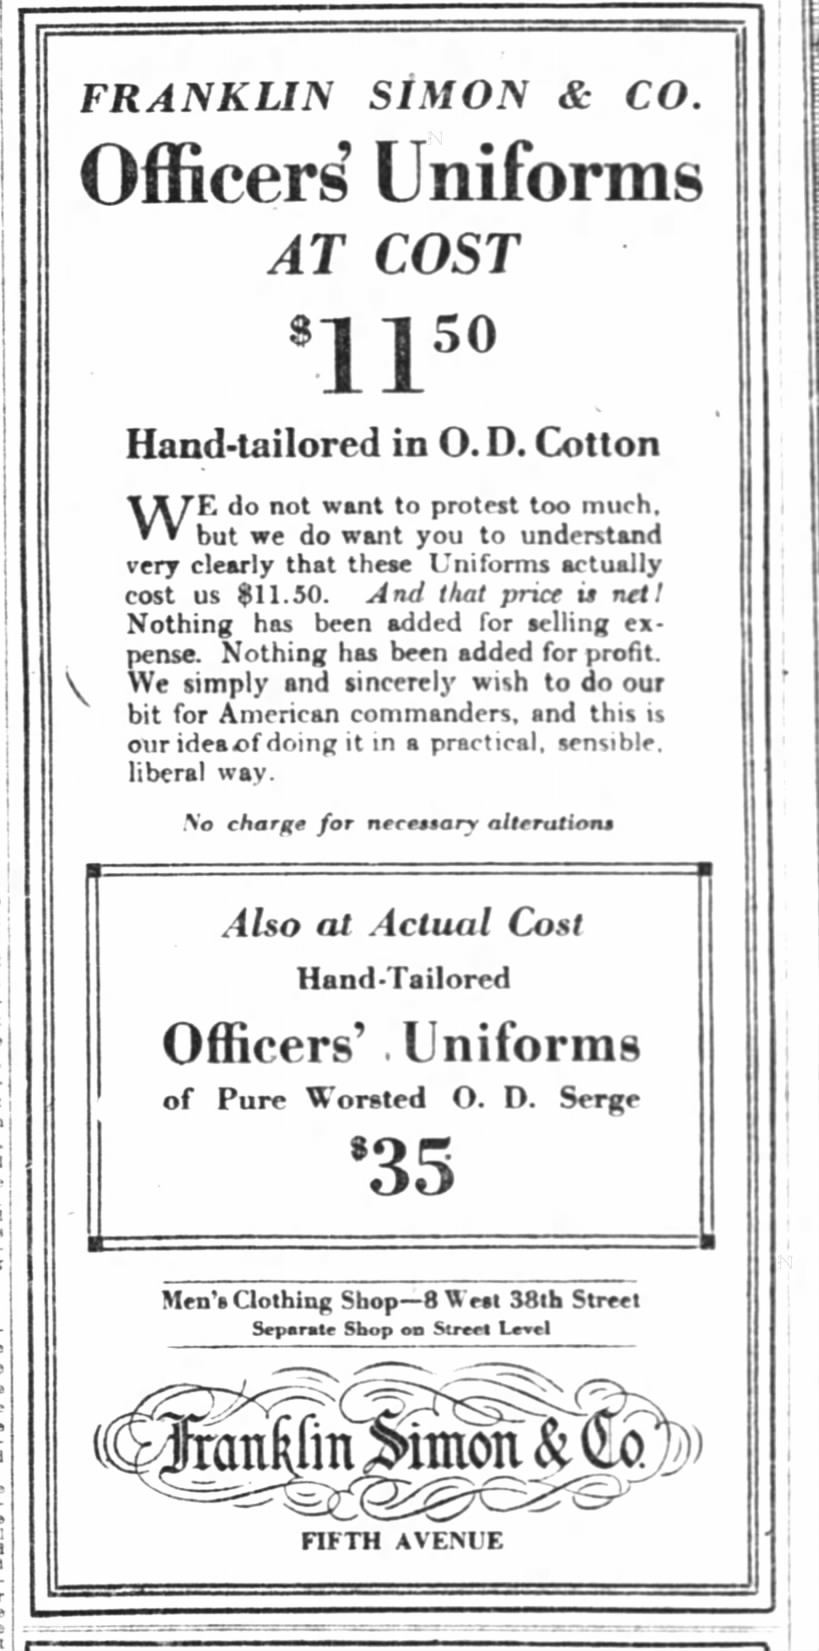 WWI officer's uniforms ad